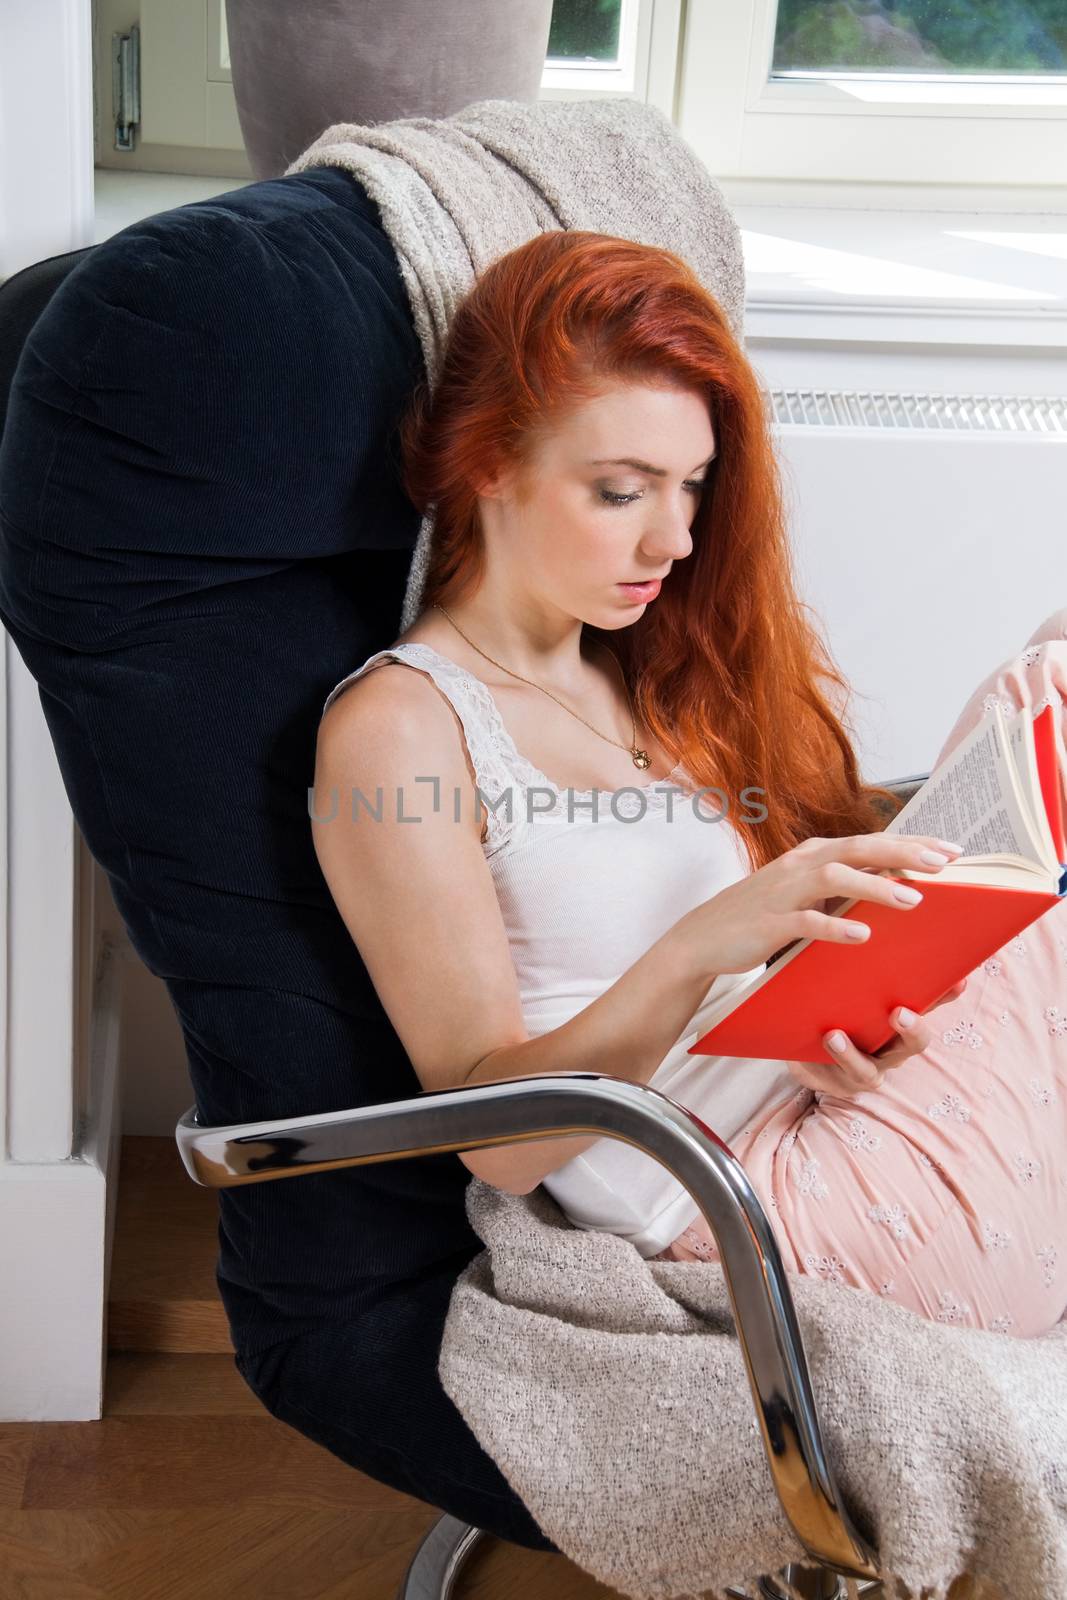 Pretty Young Woman Sitting on a Chair Beside her Bed with Legs Crossed, While Reading a Red Book Seriously.